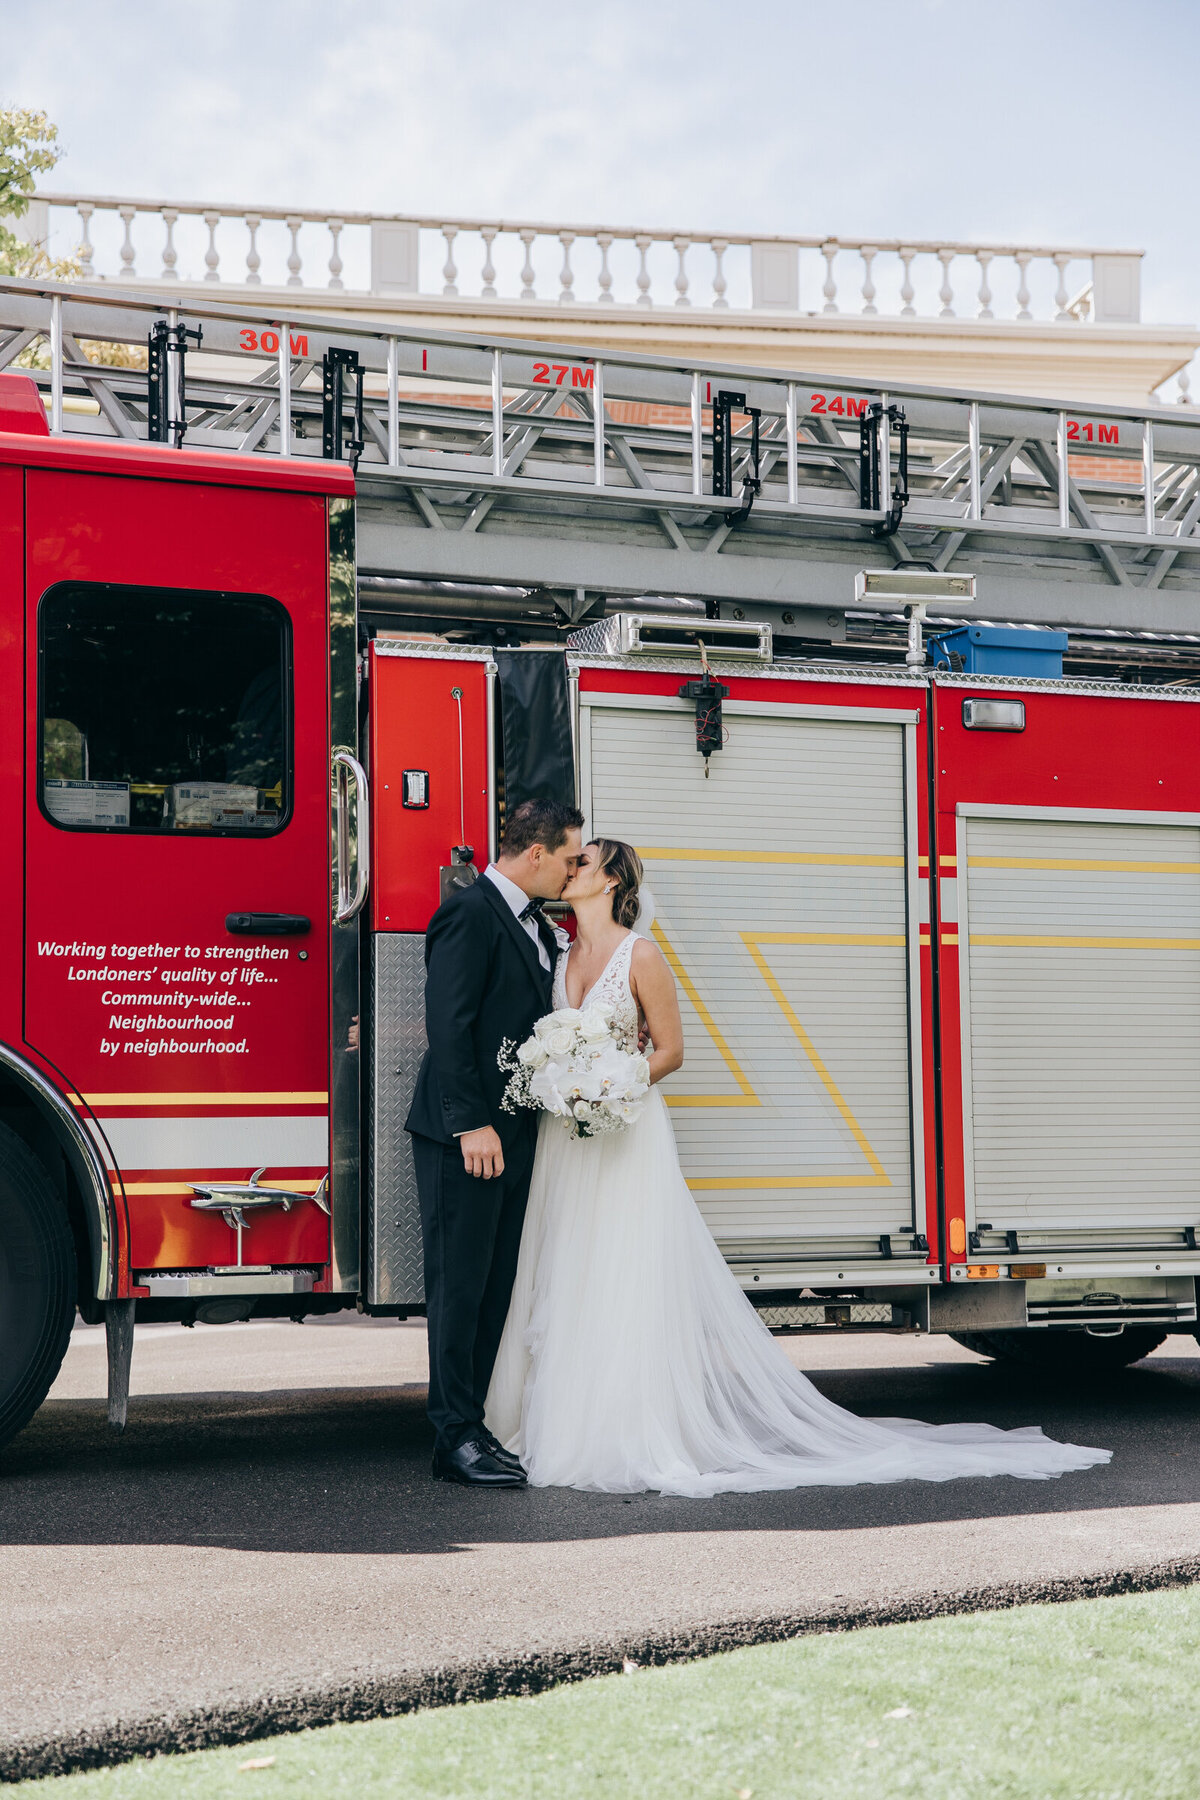 Bride and groom kissing in front of a red fire truck